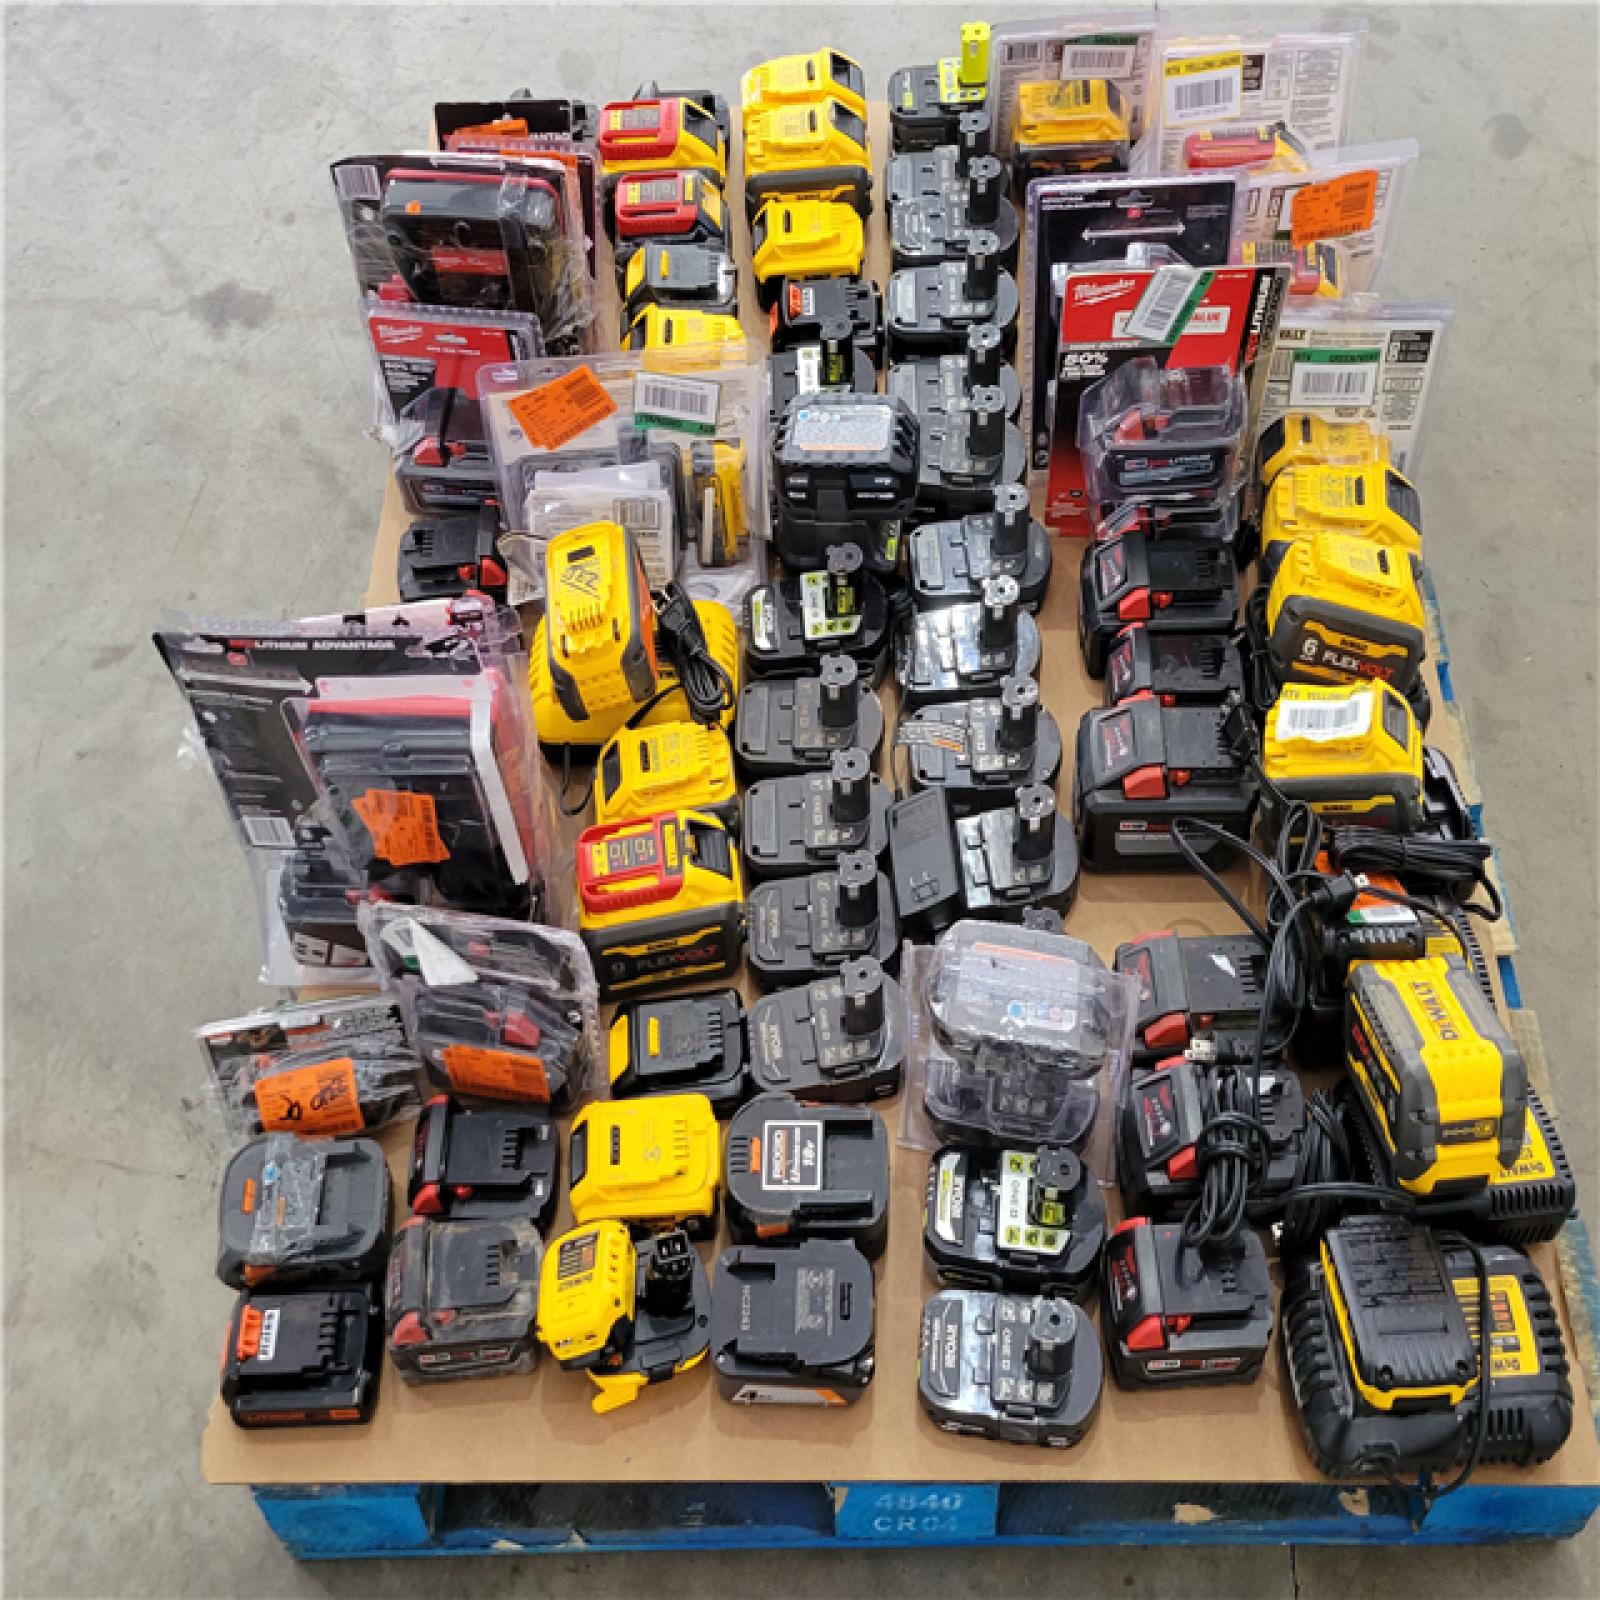 Houston Location - AS-IS Battery Pallet